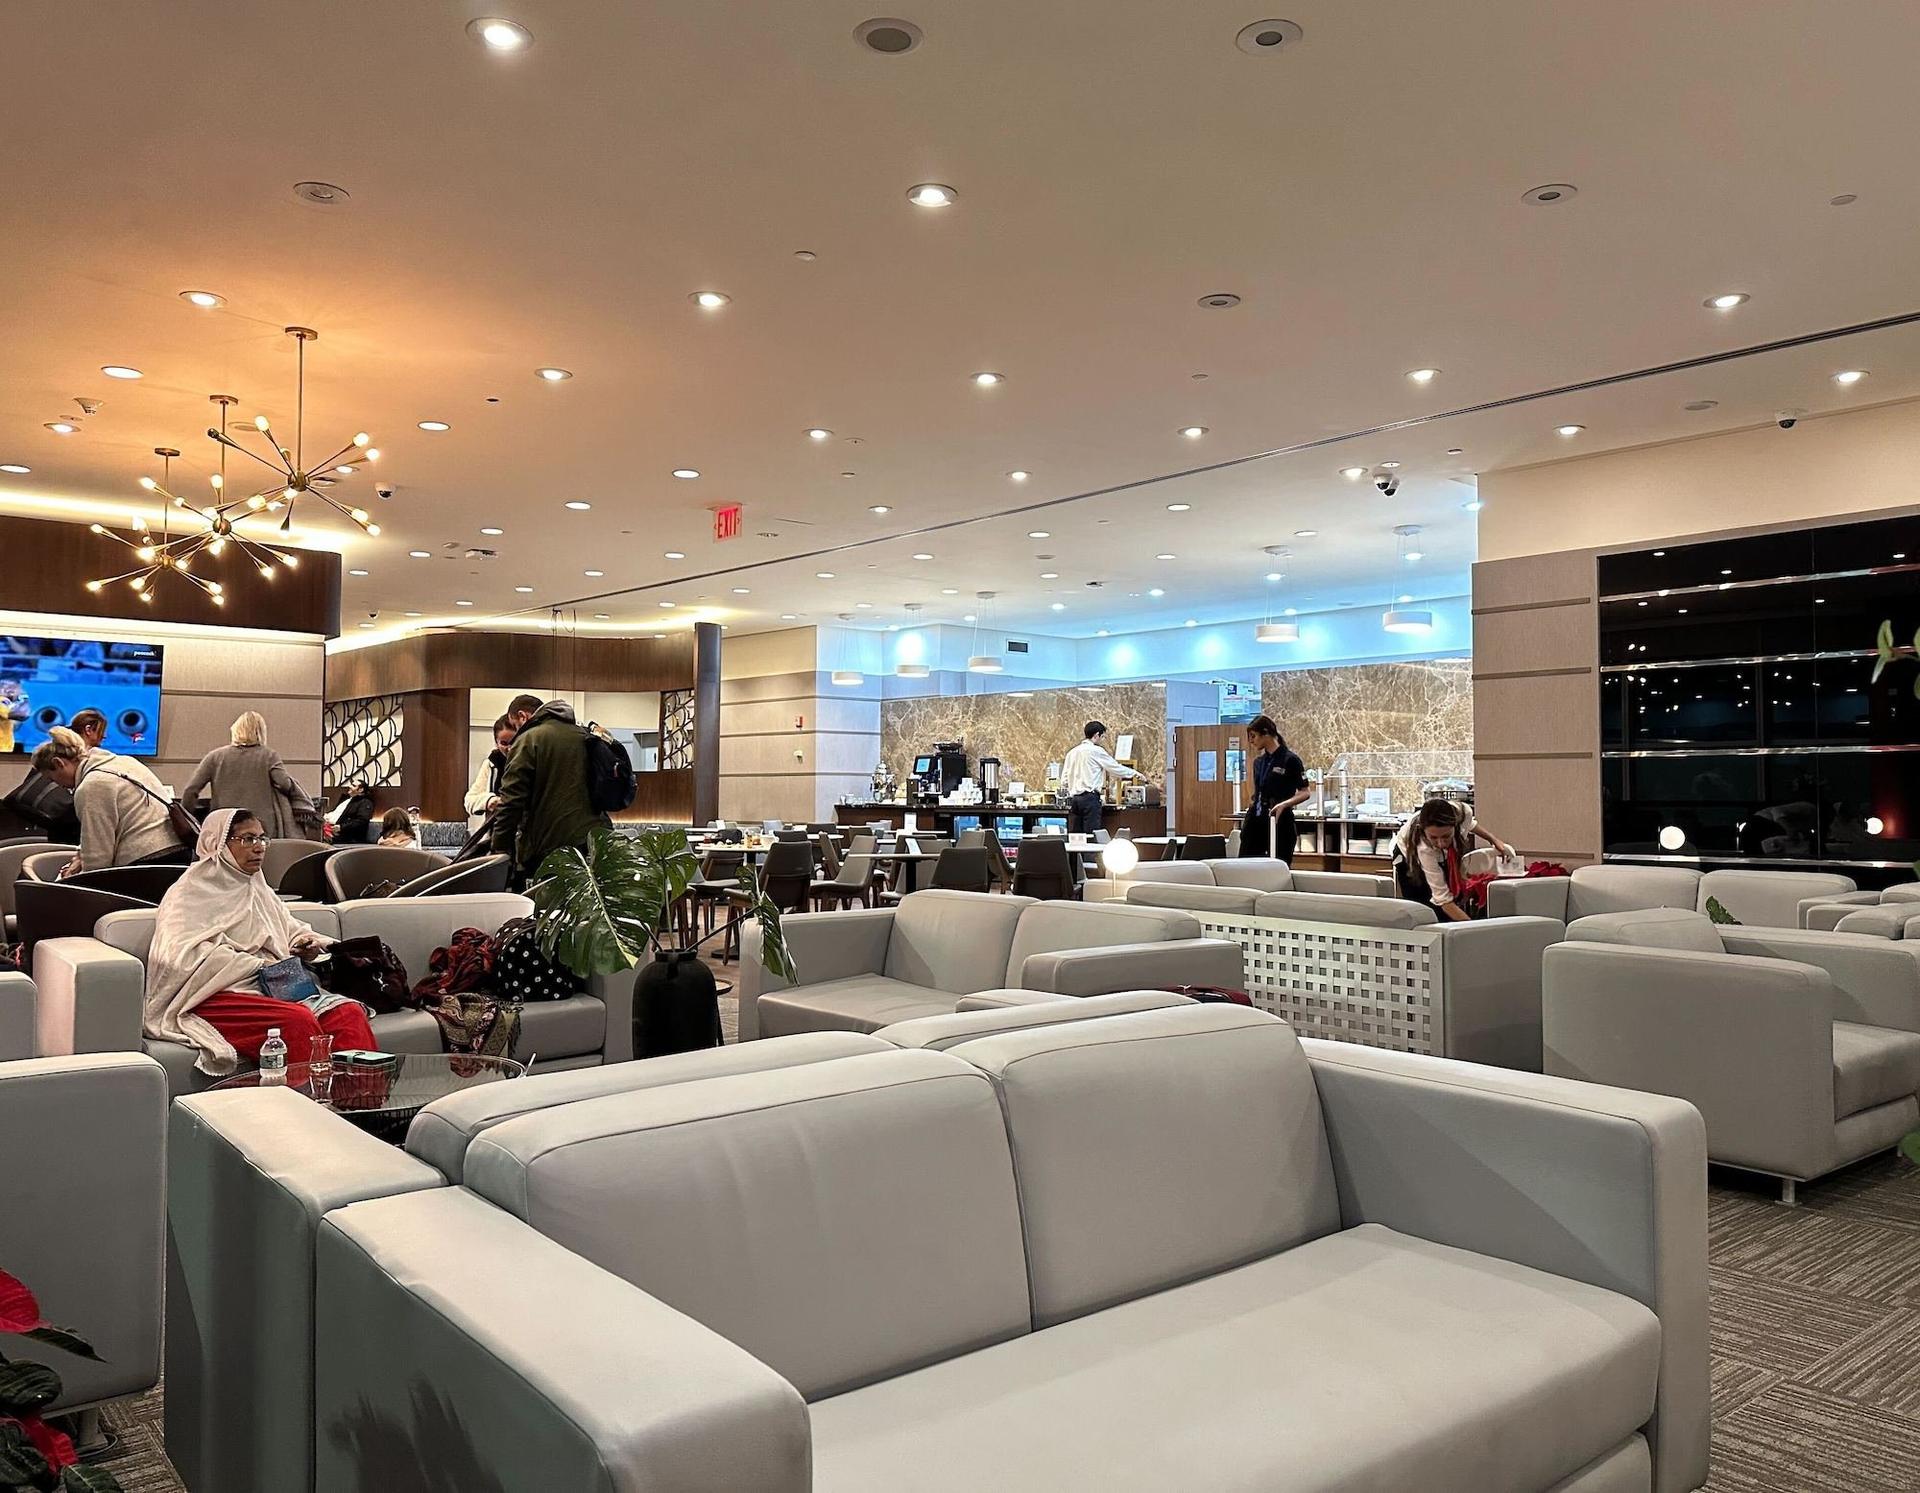 Turkish Airlines Lounge New York image 7 of 18